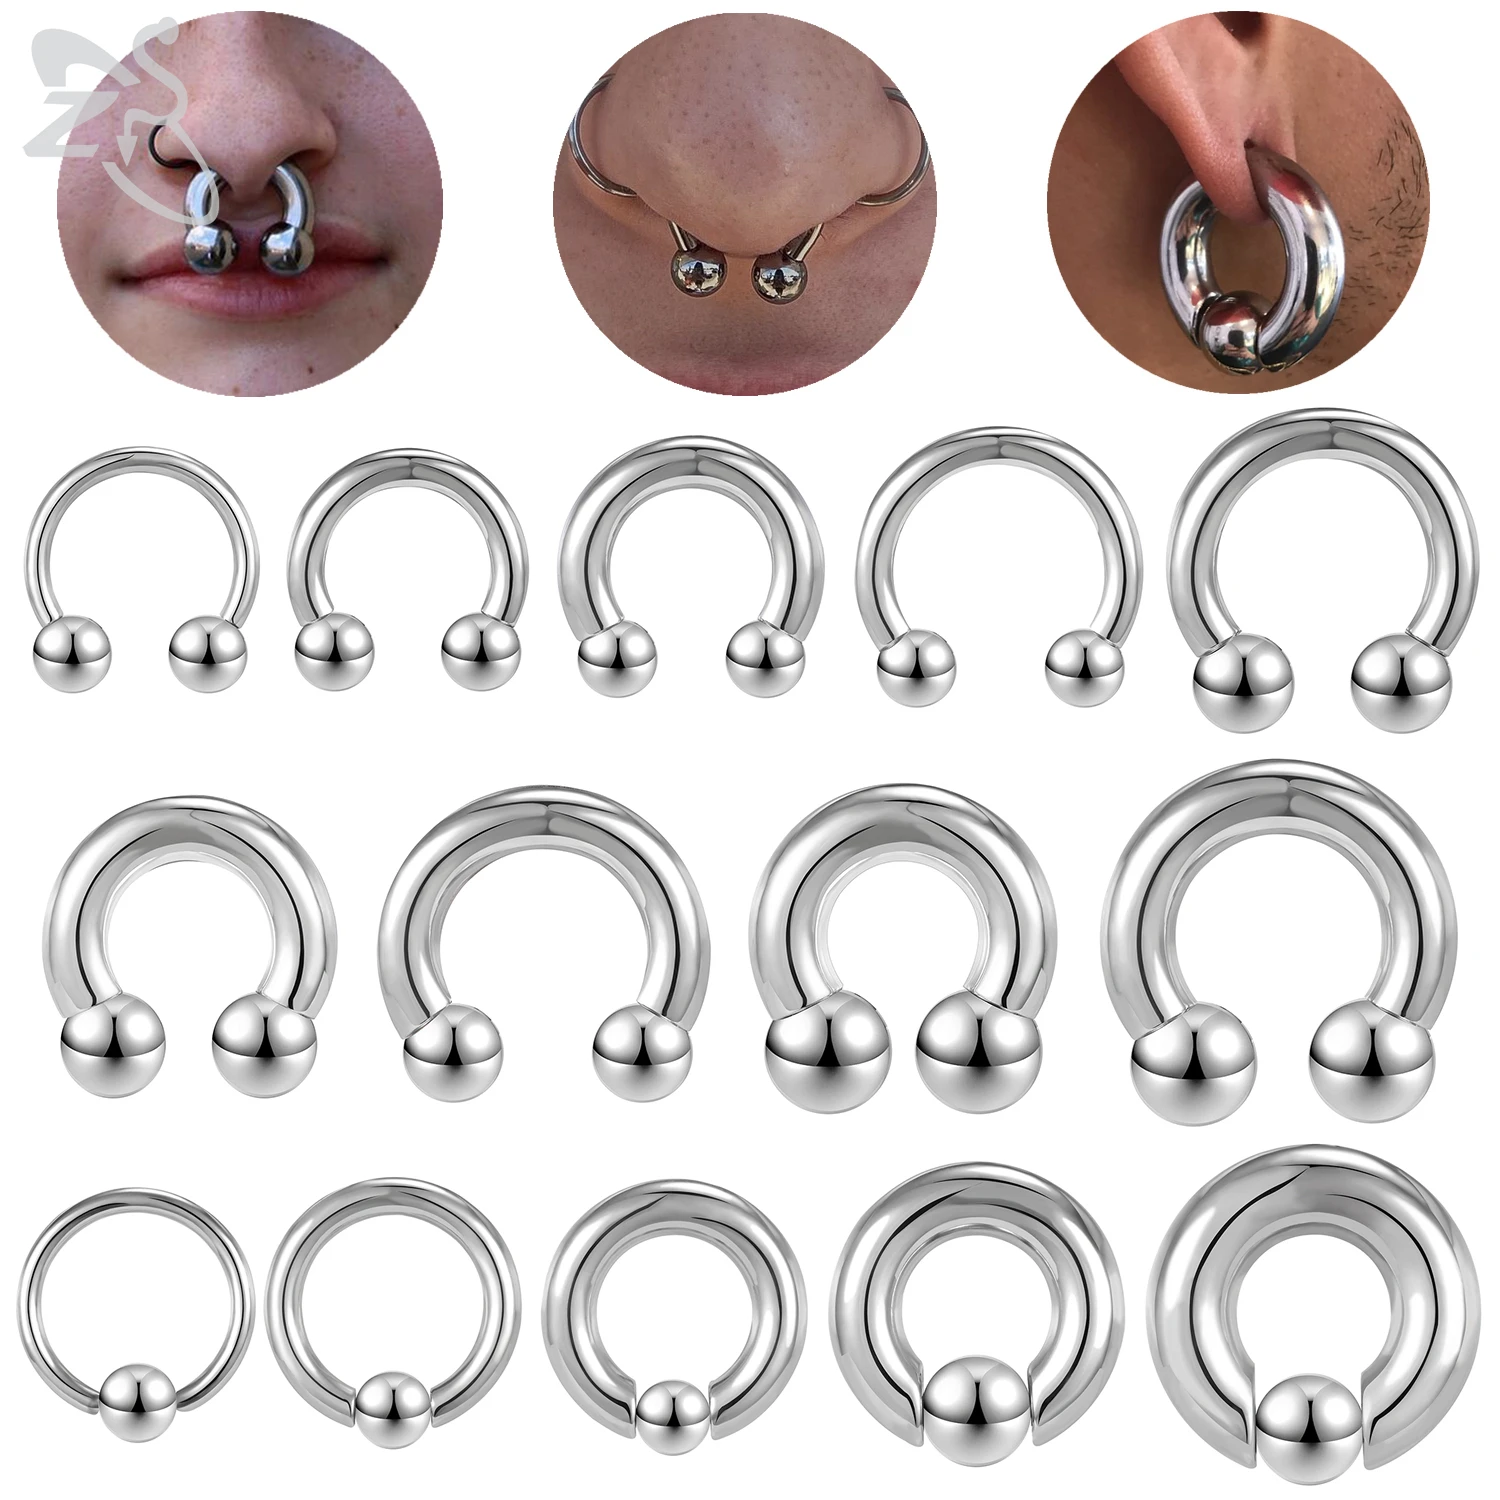 ZS-1-PC-2-4-6-8G-Stainelss-Steel-Horseshoe-Nose-Ring-Internal-Threaded ...